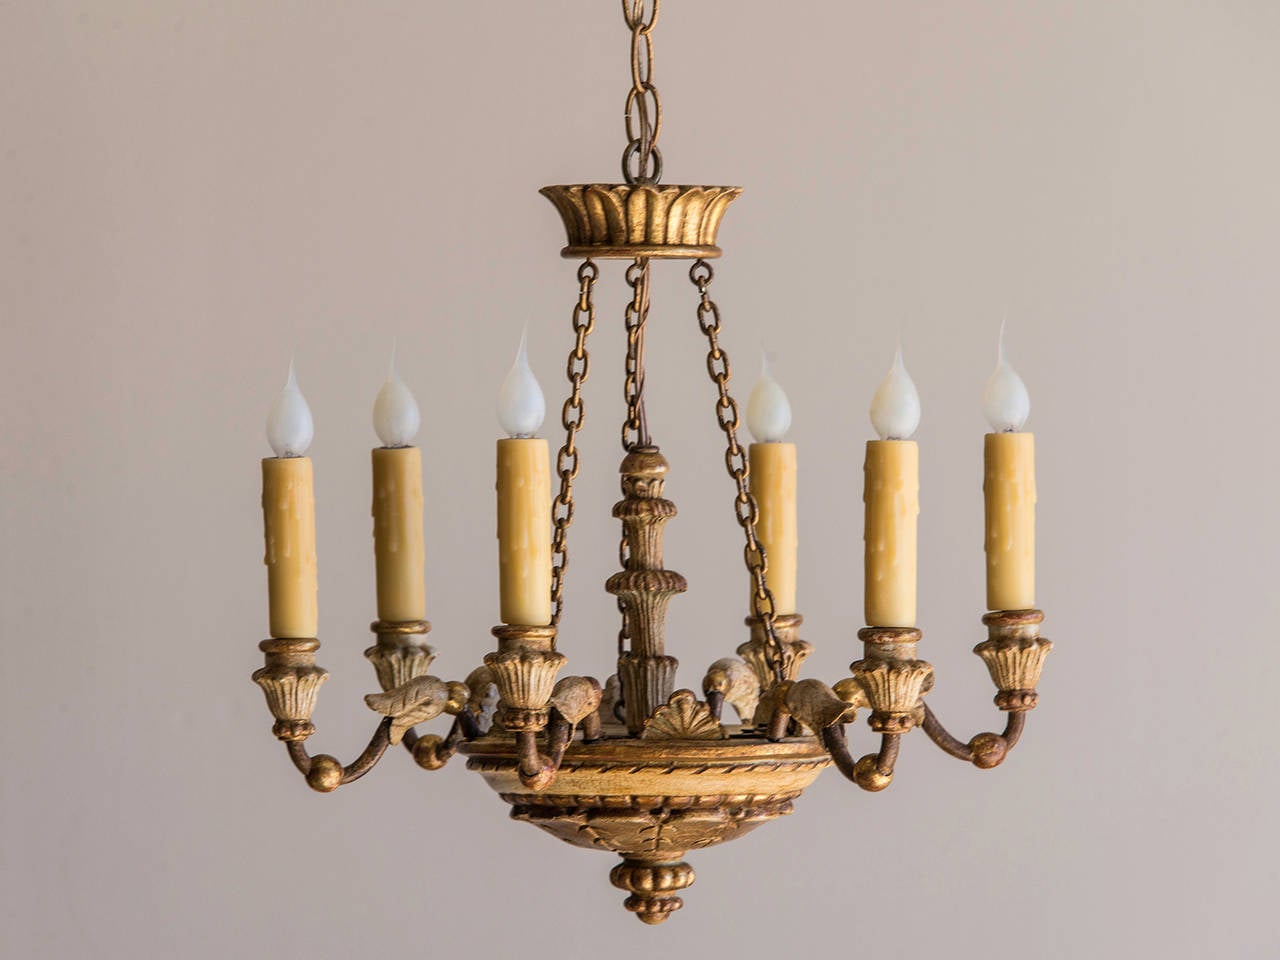 Italian Neoclassical Painted and Gilded Vintage Six Arm Chandelier, Italy circa 1920